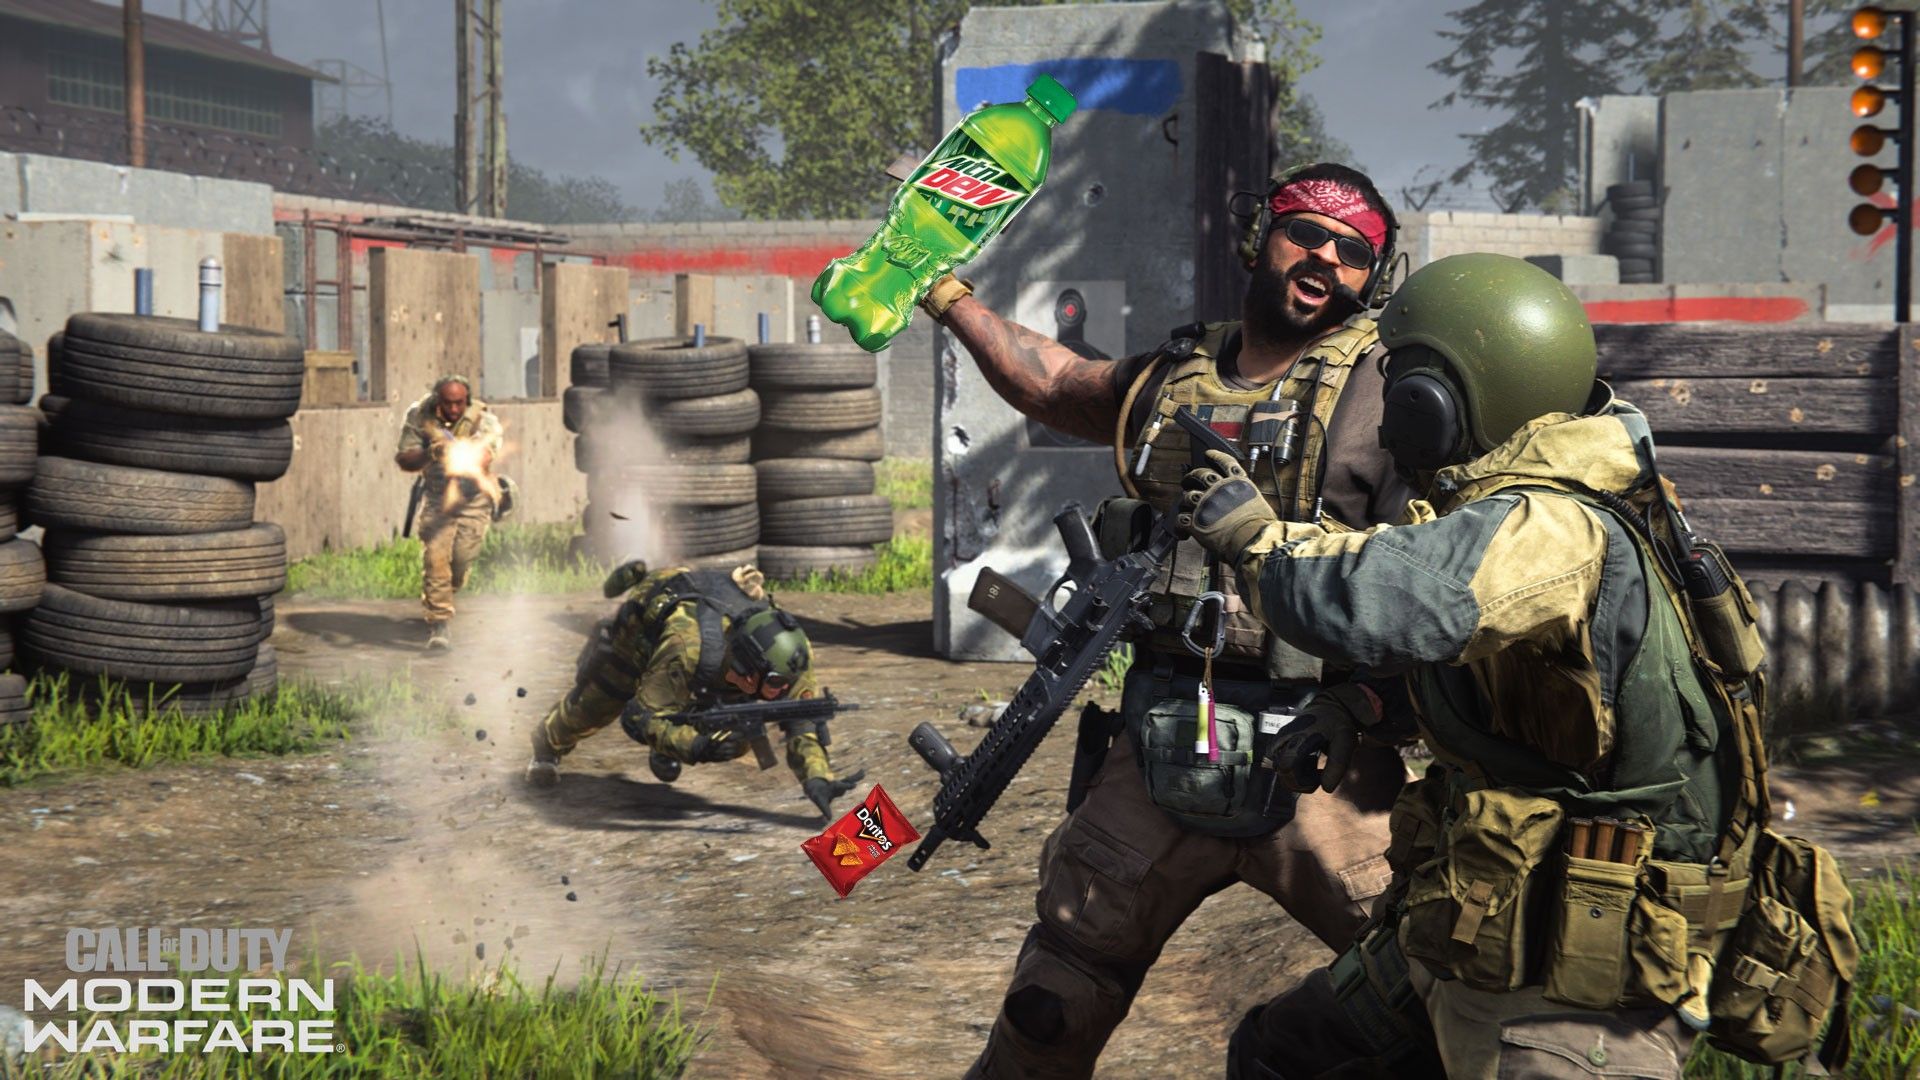 Activision exploits Modern Warfare 3 by featuring Pepsi sponsorship, eat  Dorito's and drink Mountain Dew to receive Double XP